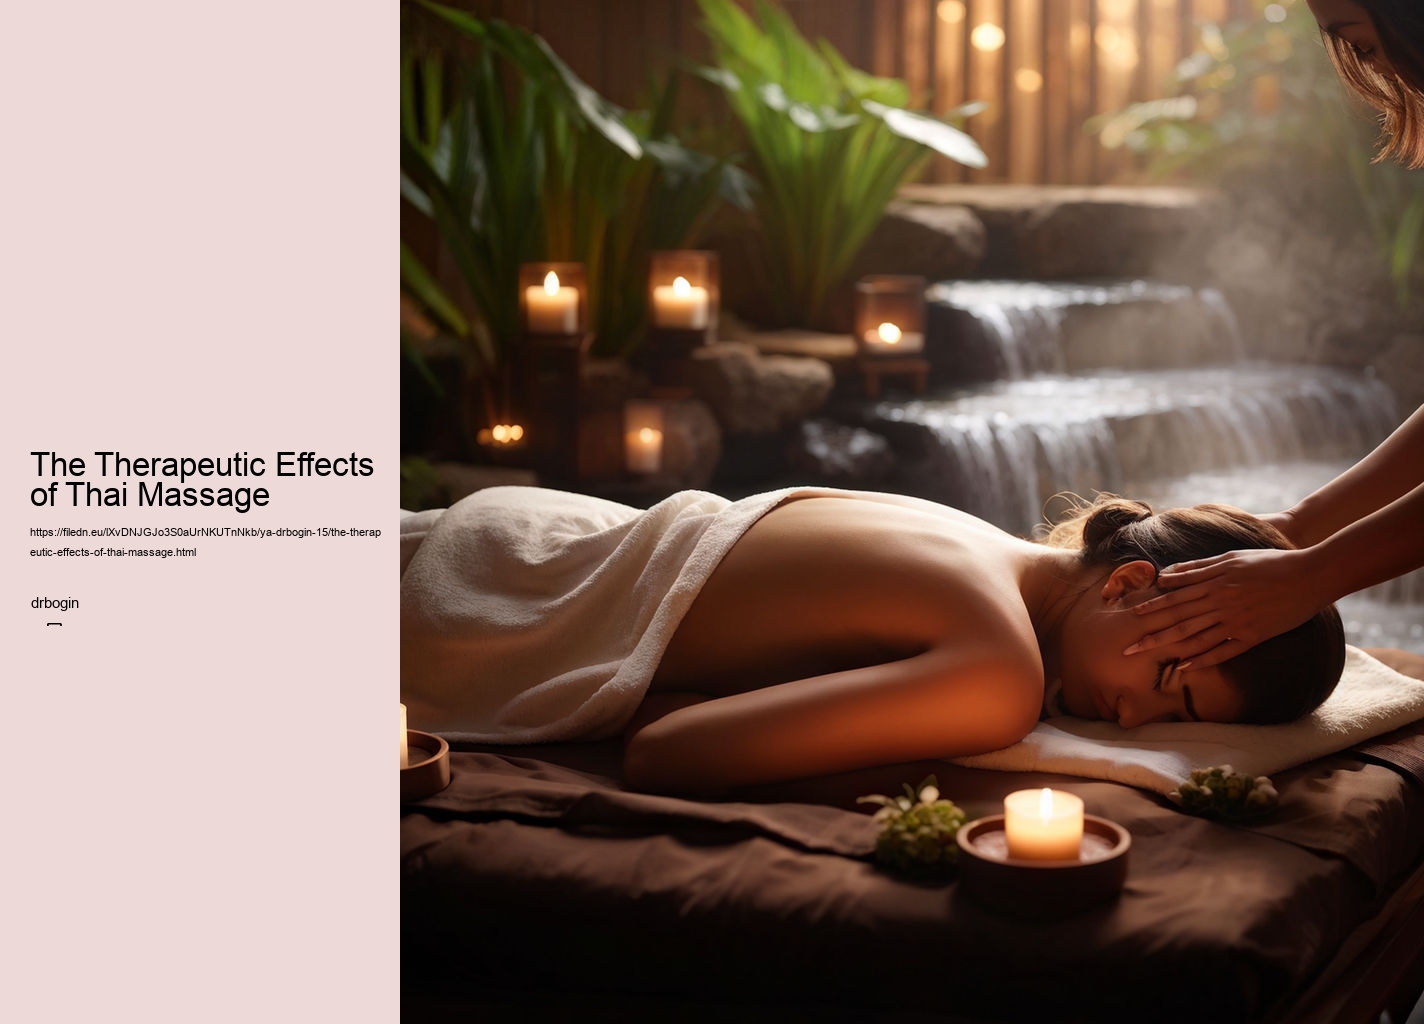 The Therapeutic Effects of Thai Massage